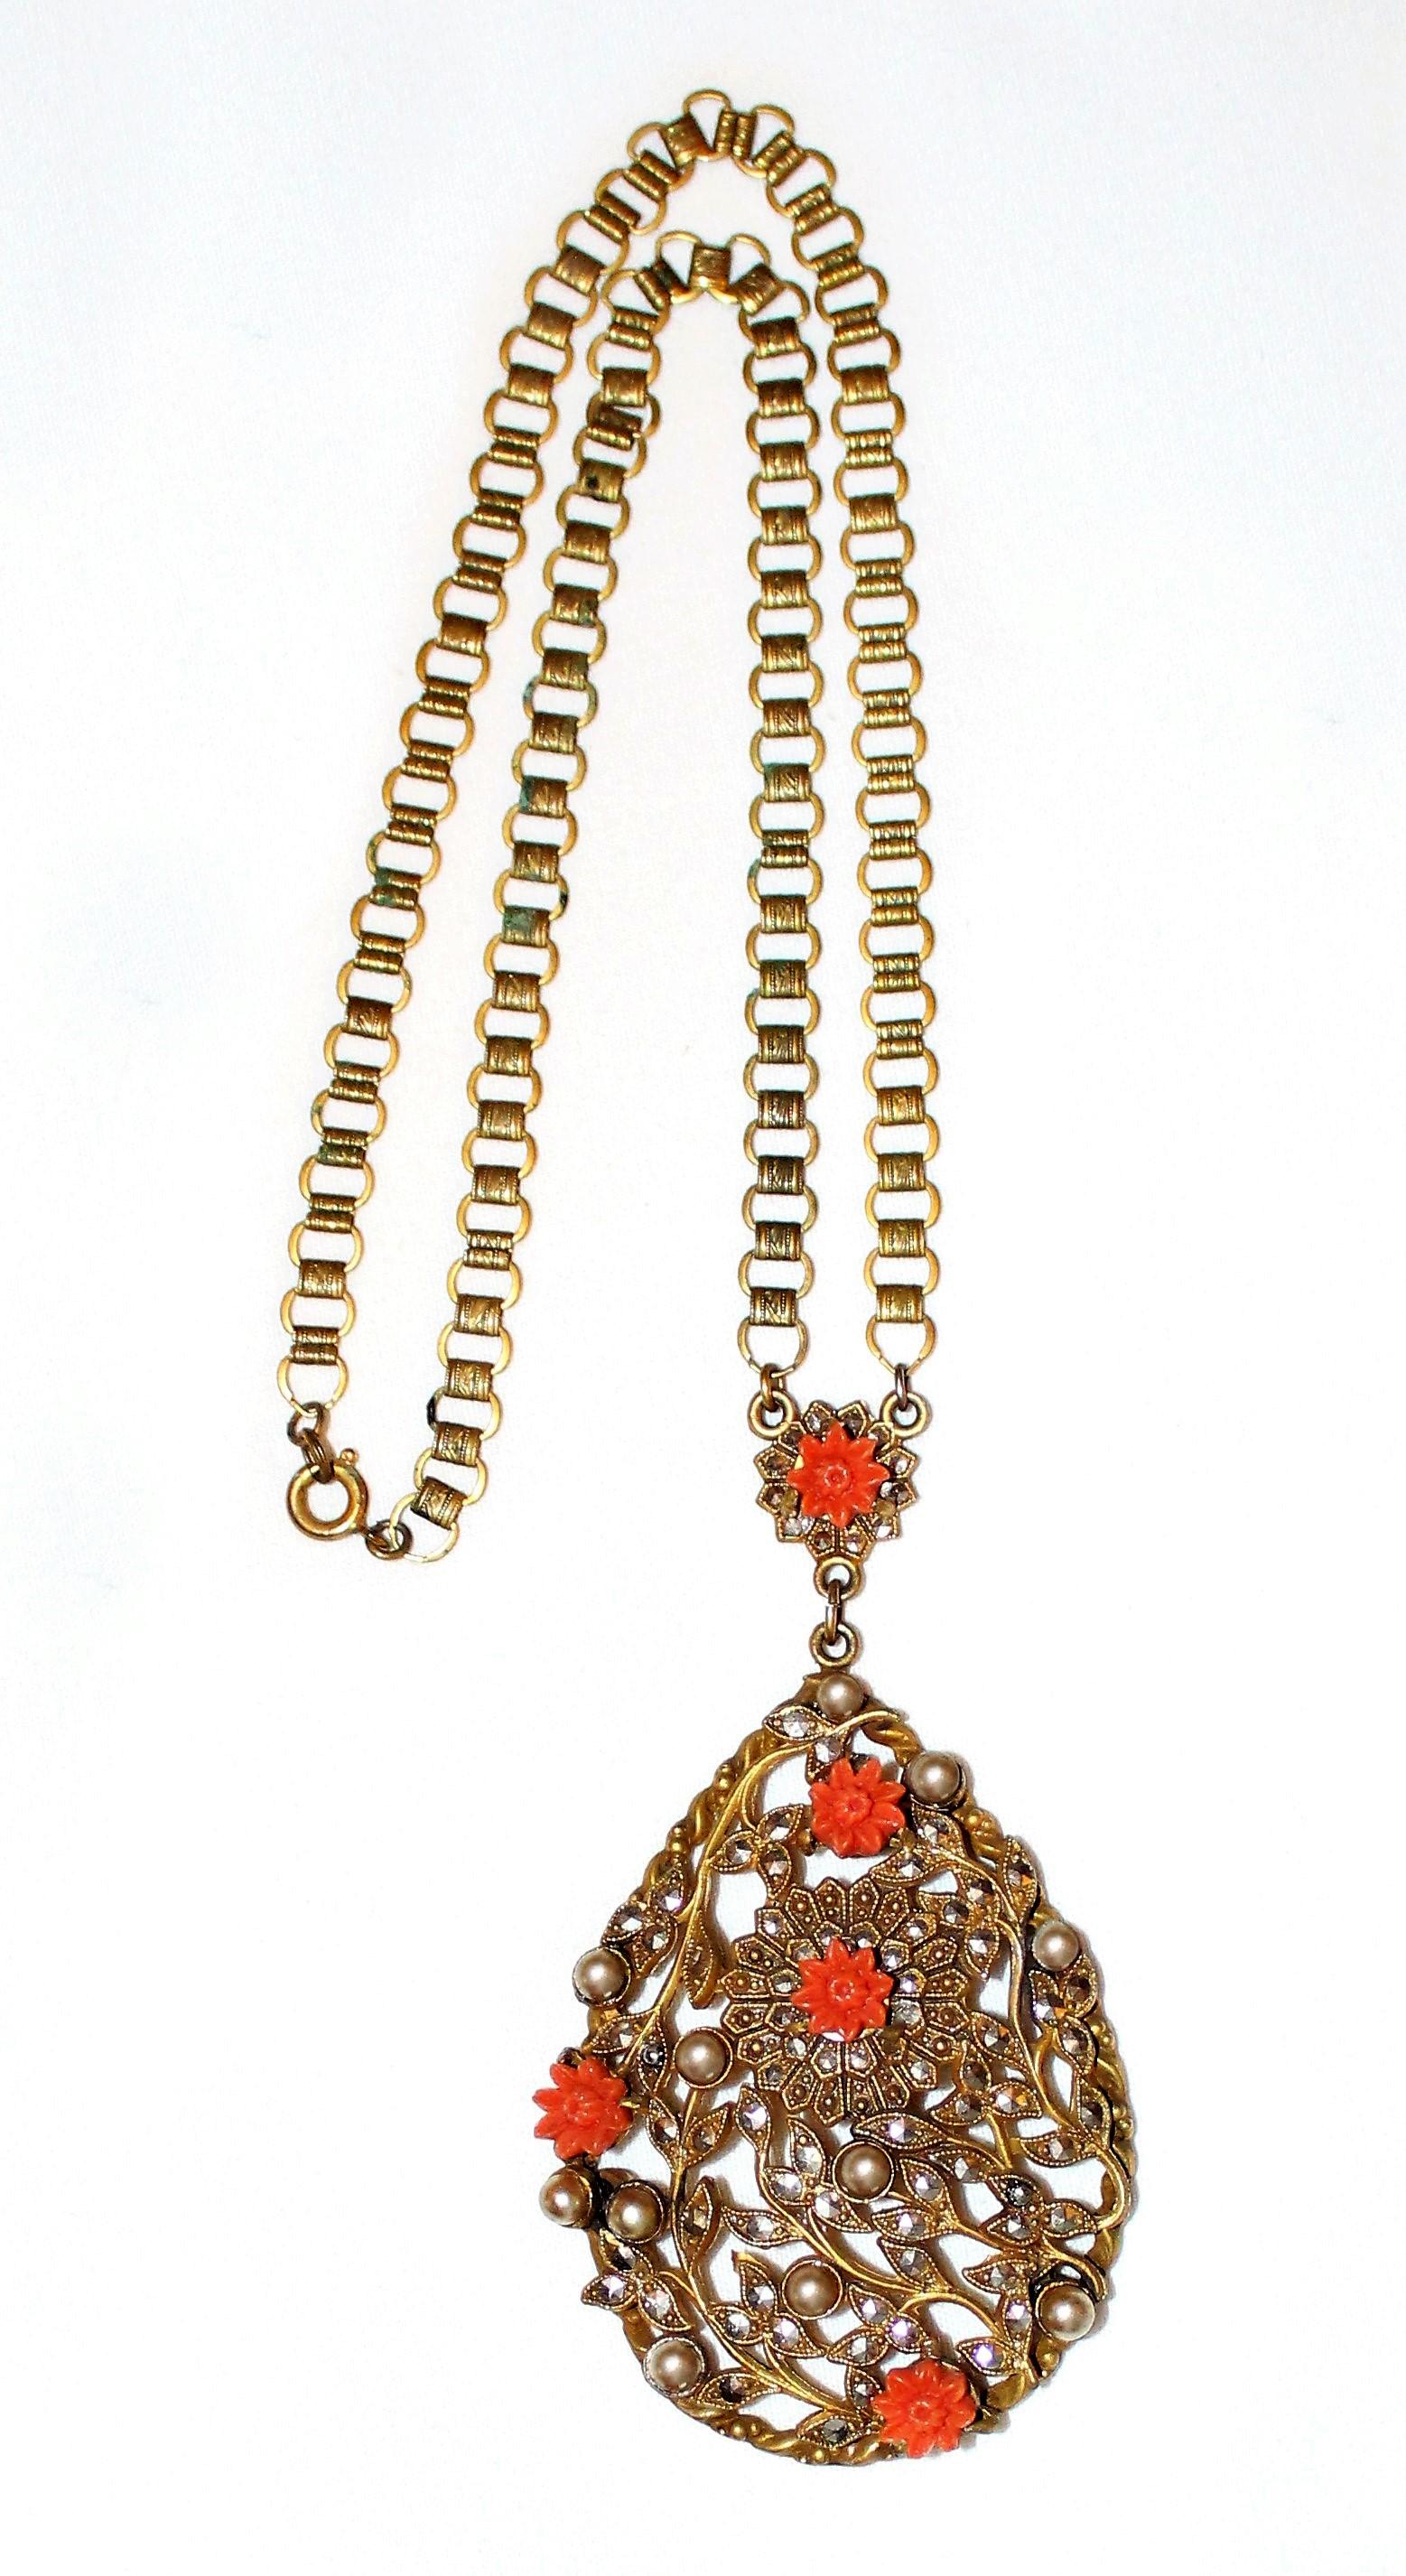 Circa 1930 goldtone metal book-chain necklace with a large floral motif pendant.  This ornately designed pendent is set with marcasite, faux-pearls and is embellished with coral celluloid flowers.  The necklace measures 19